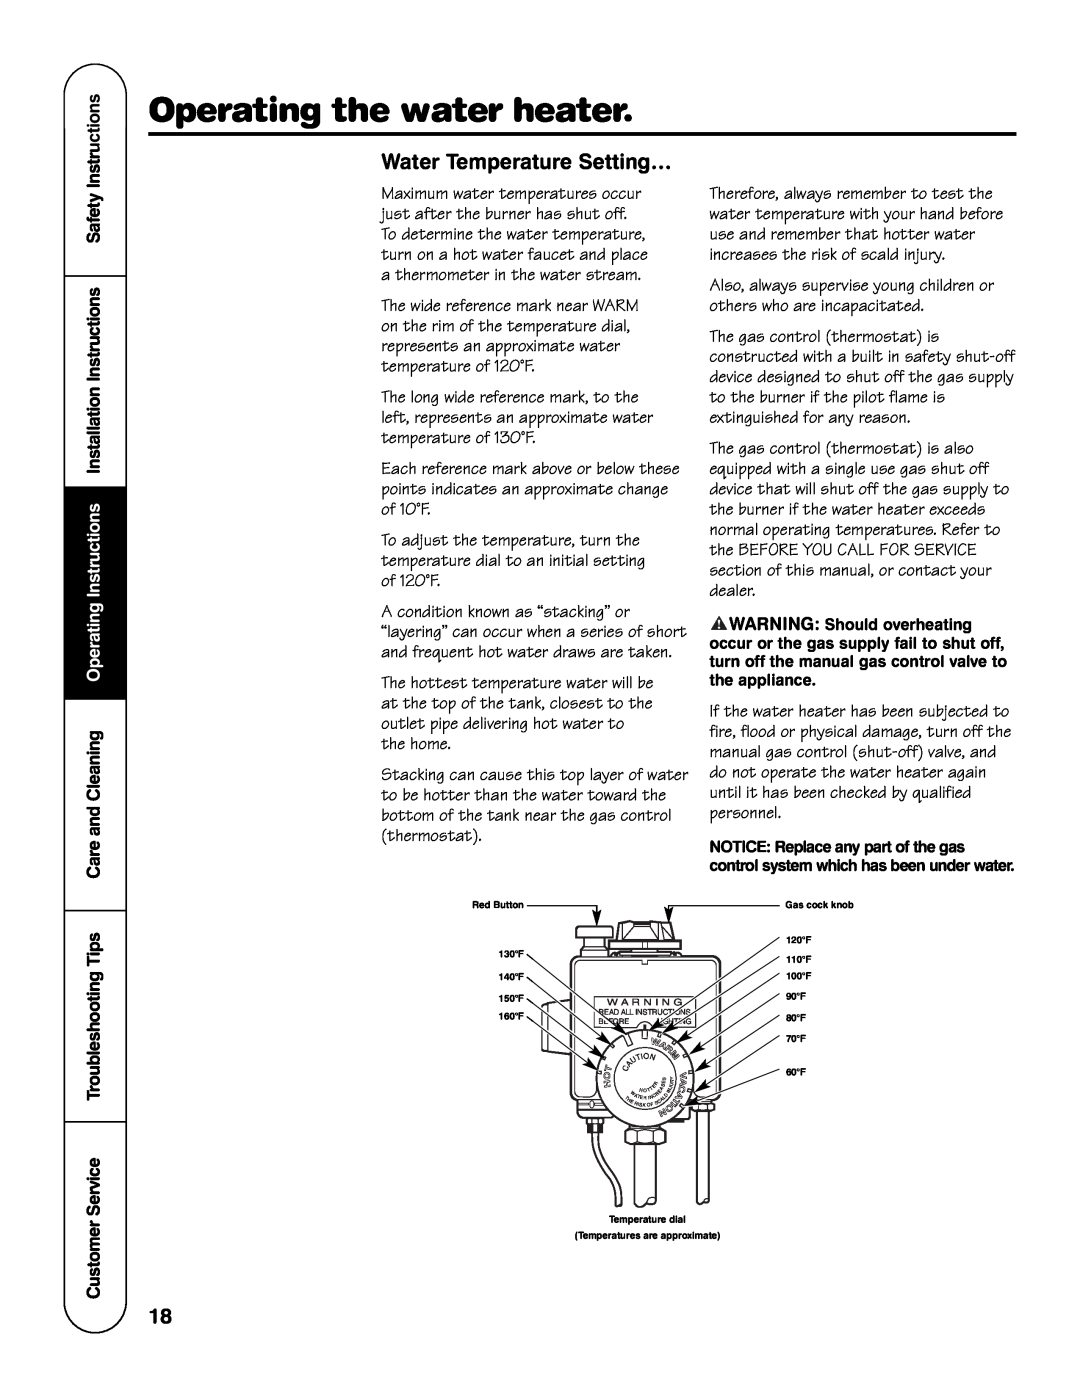 GE GG Series Water Temperature Setting…, Operating the water heater, Instructions, Service Troubleshooting Tips, Customer 